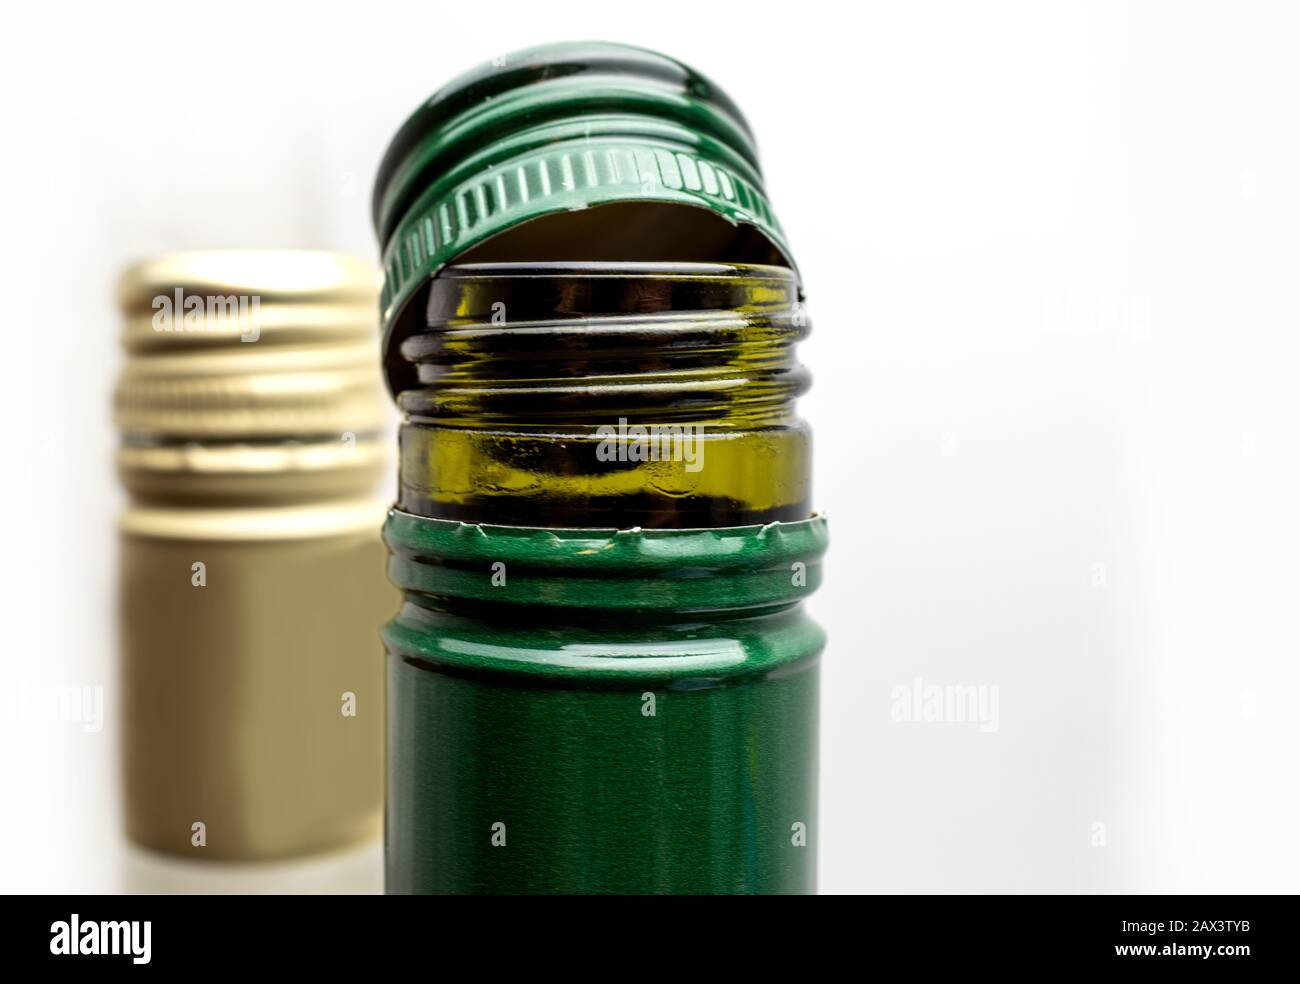 Screw bottle caps in green and white colors Stock Photo